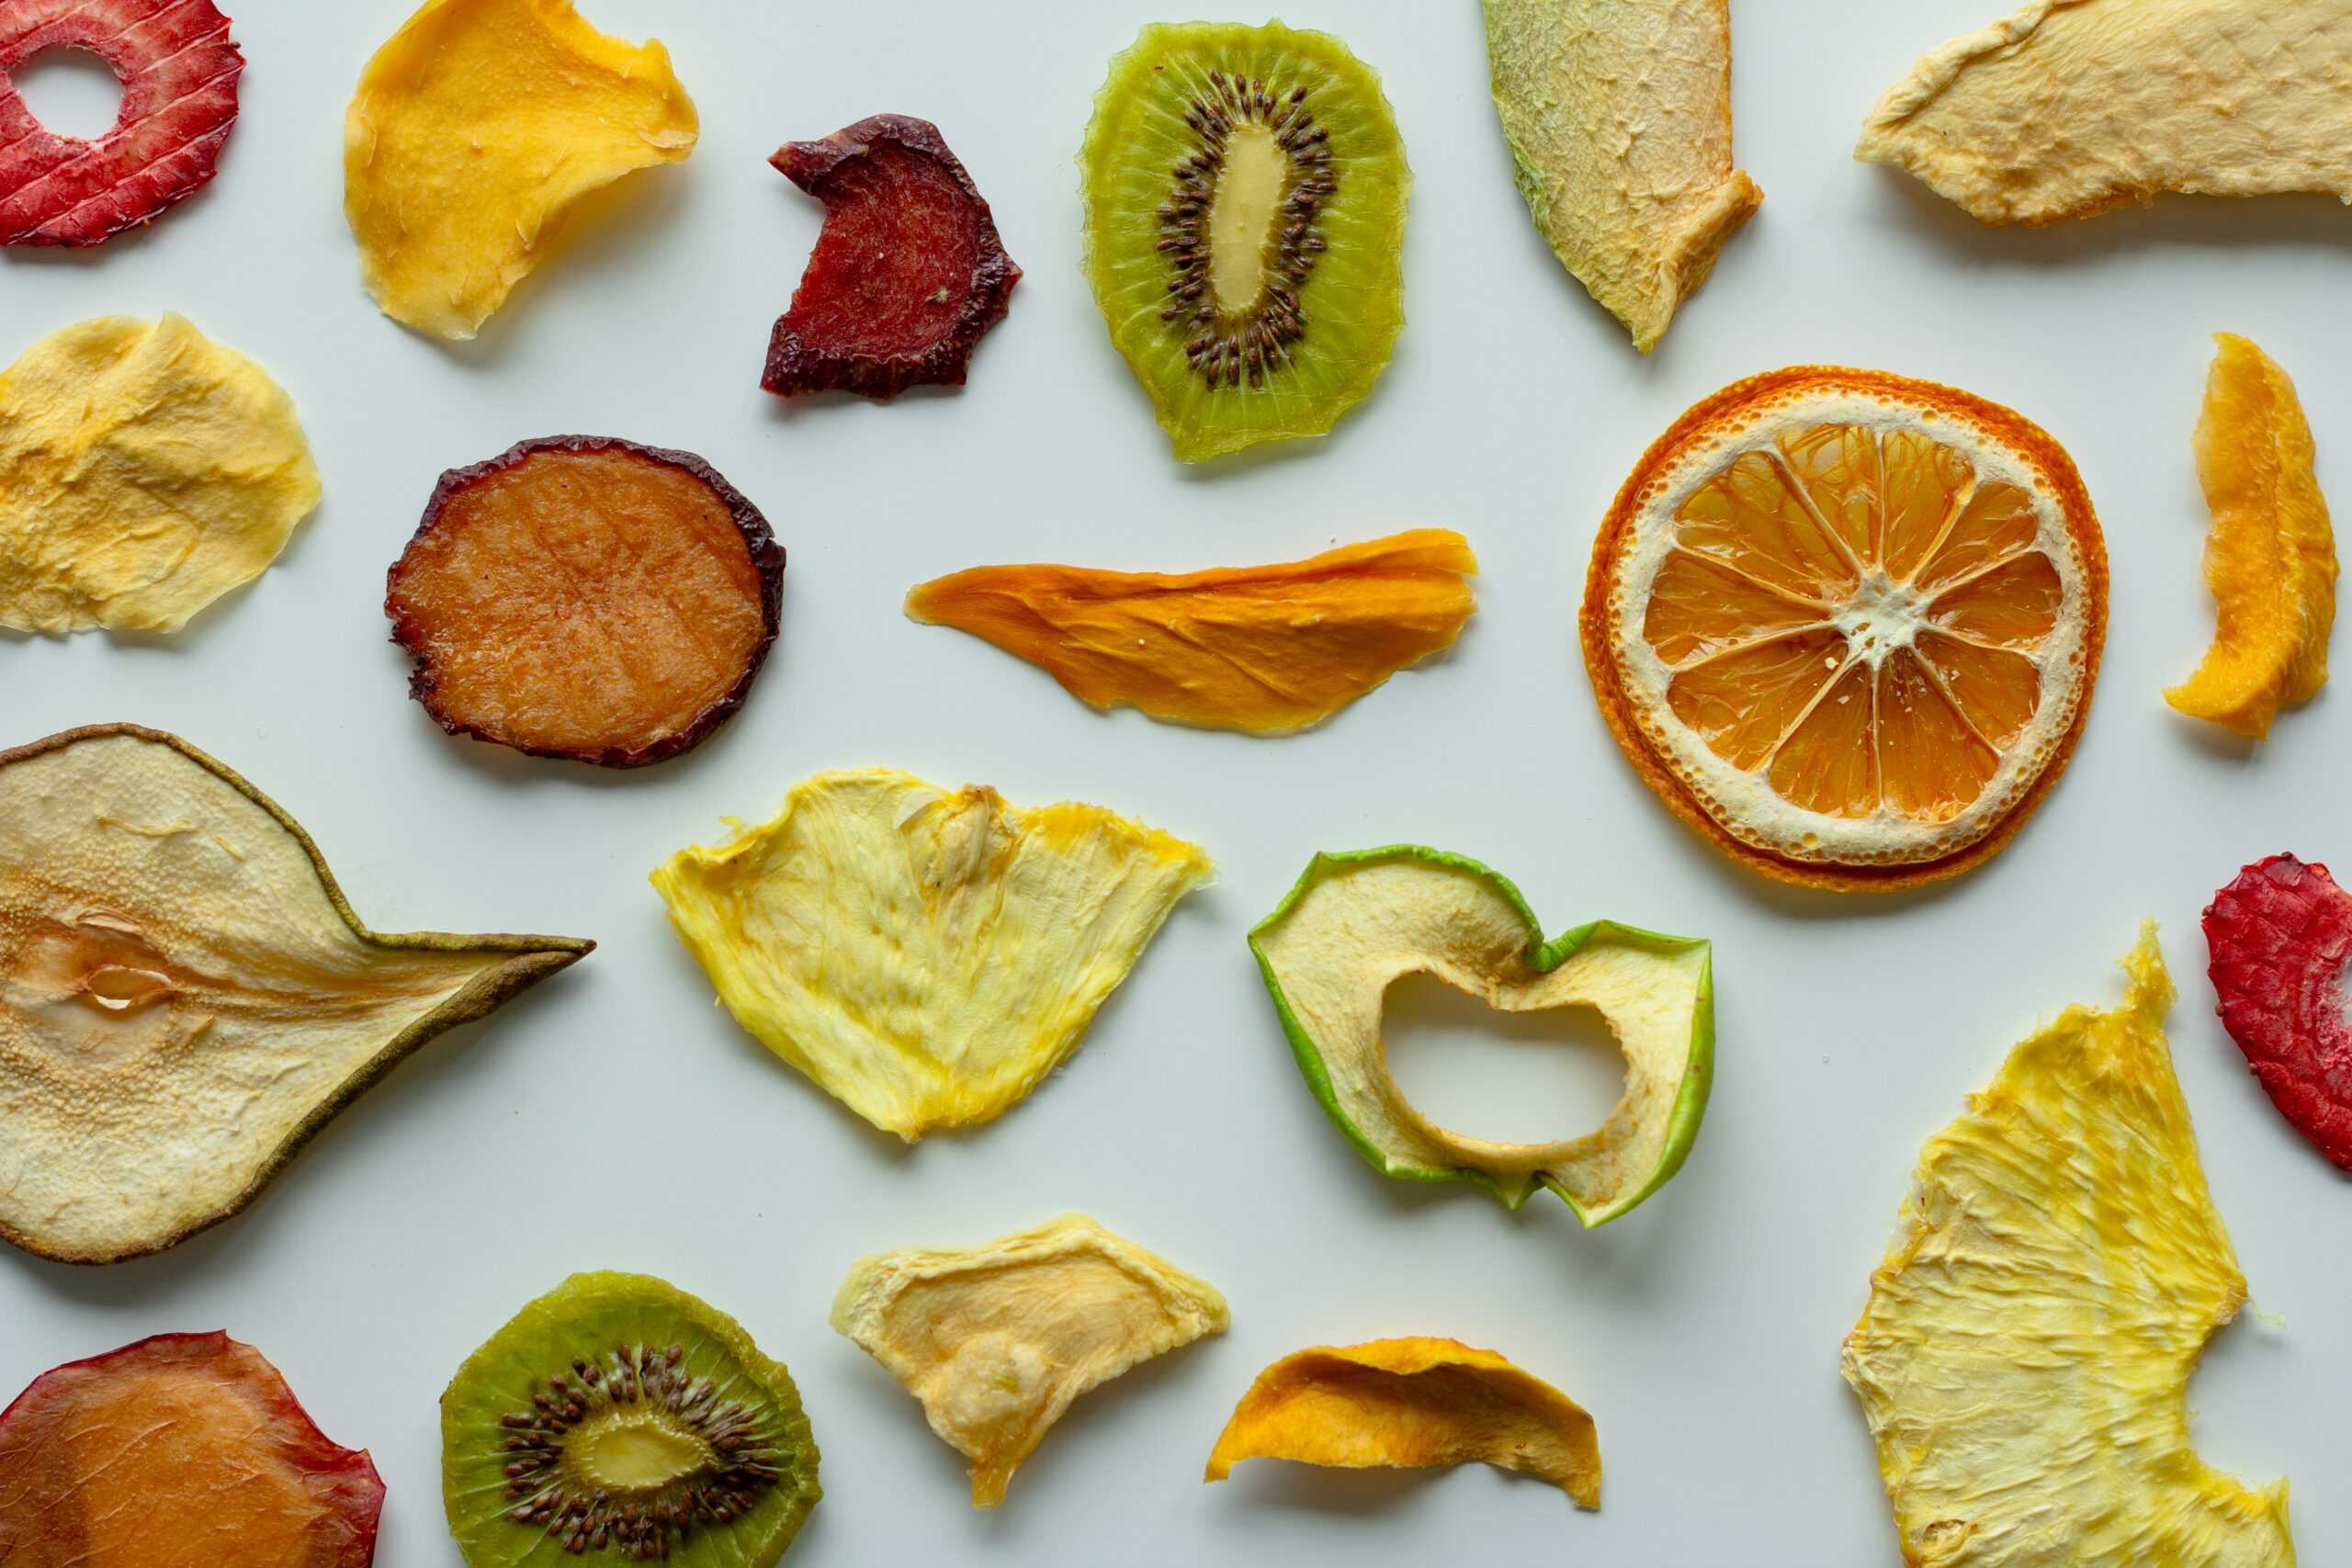 dehydrated fruits and vegetables